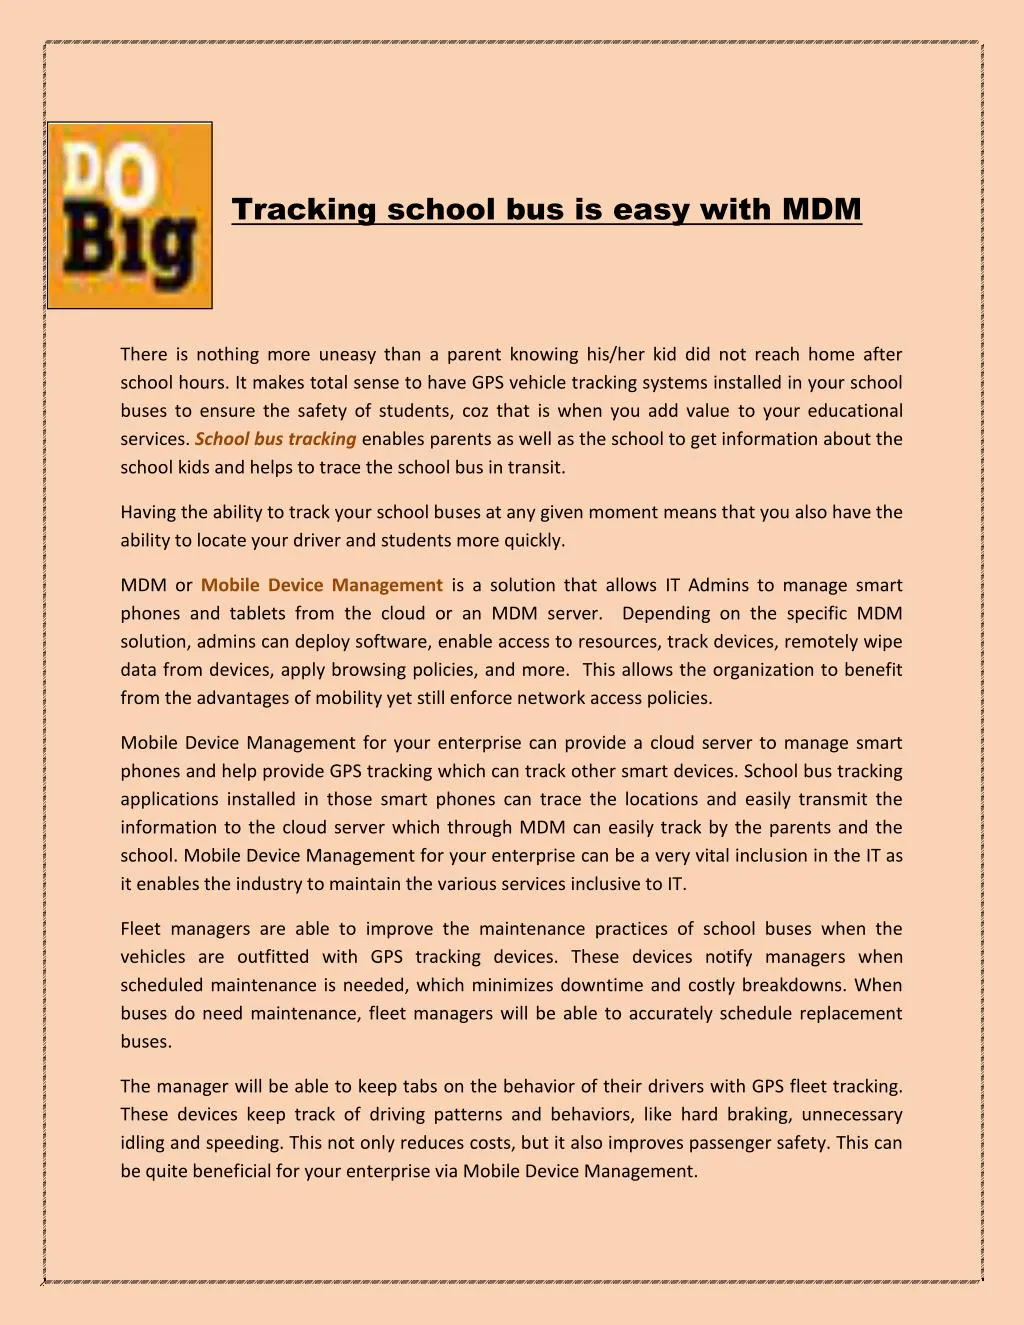 tracking school bus is easy with mdm